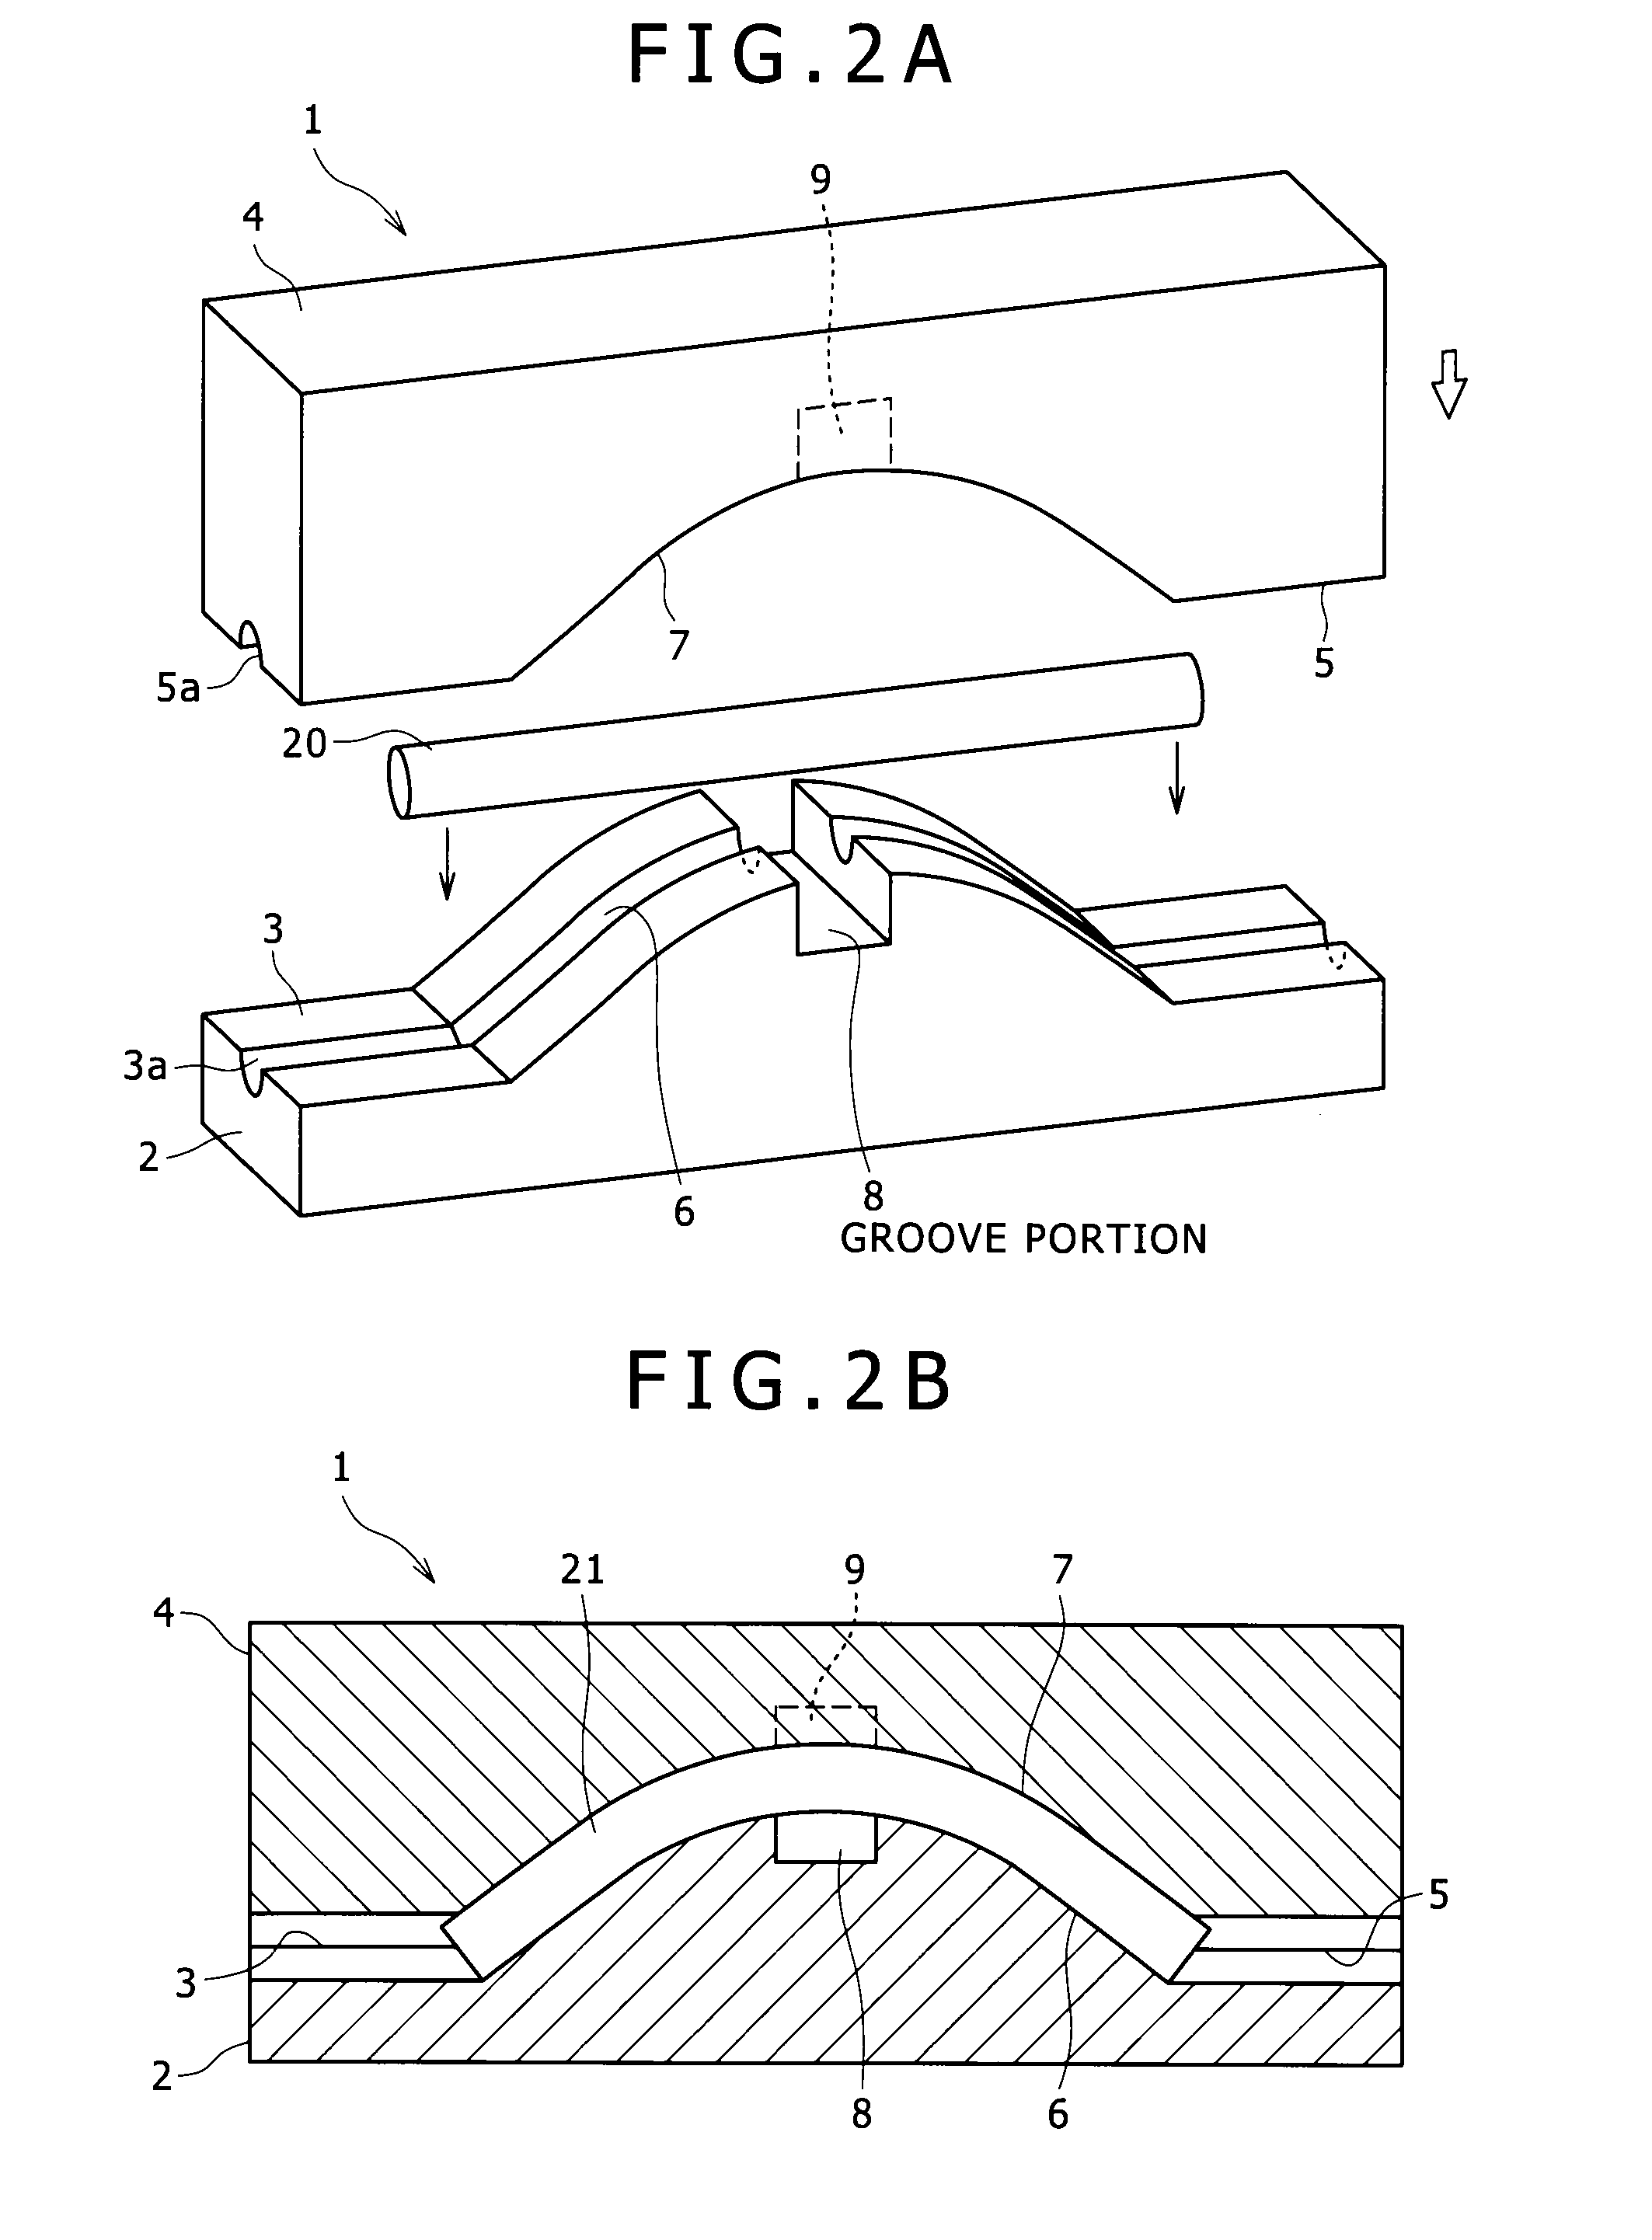 Bending die, and apparatus and method for manufacturing automotive suspension arm using the same